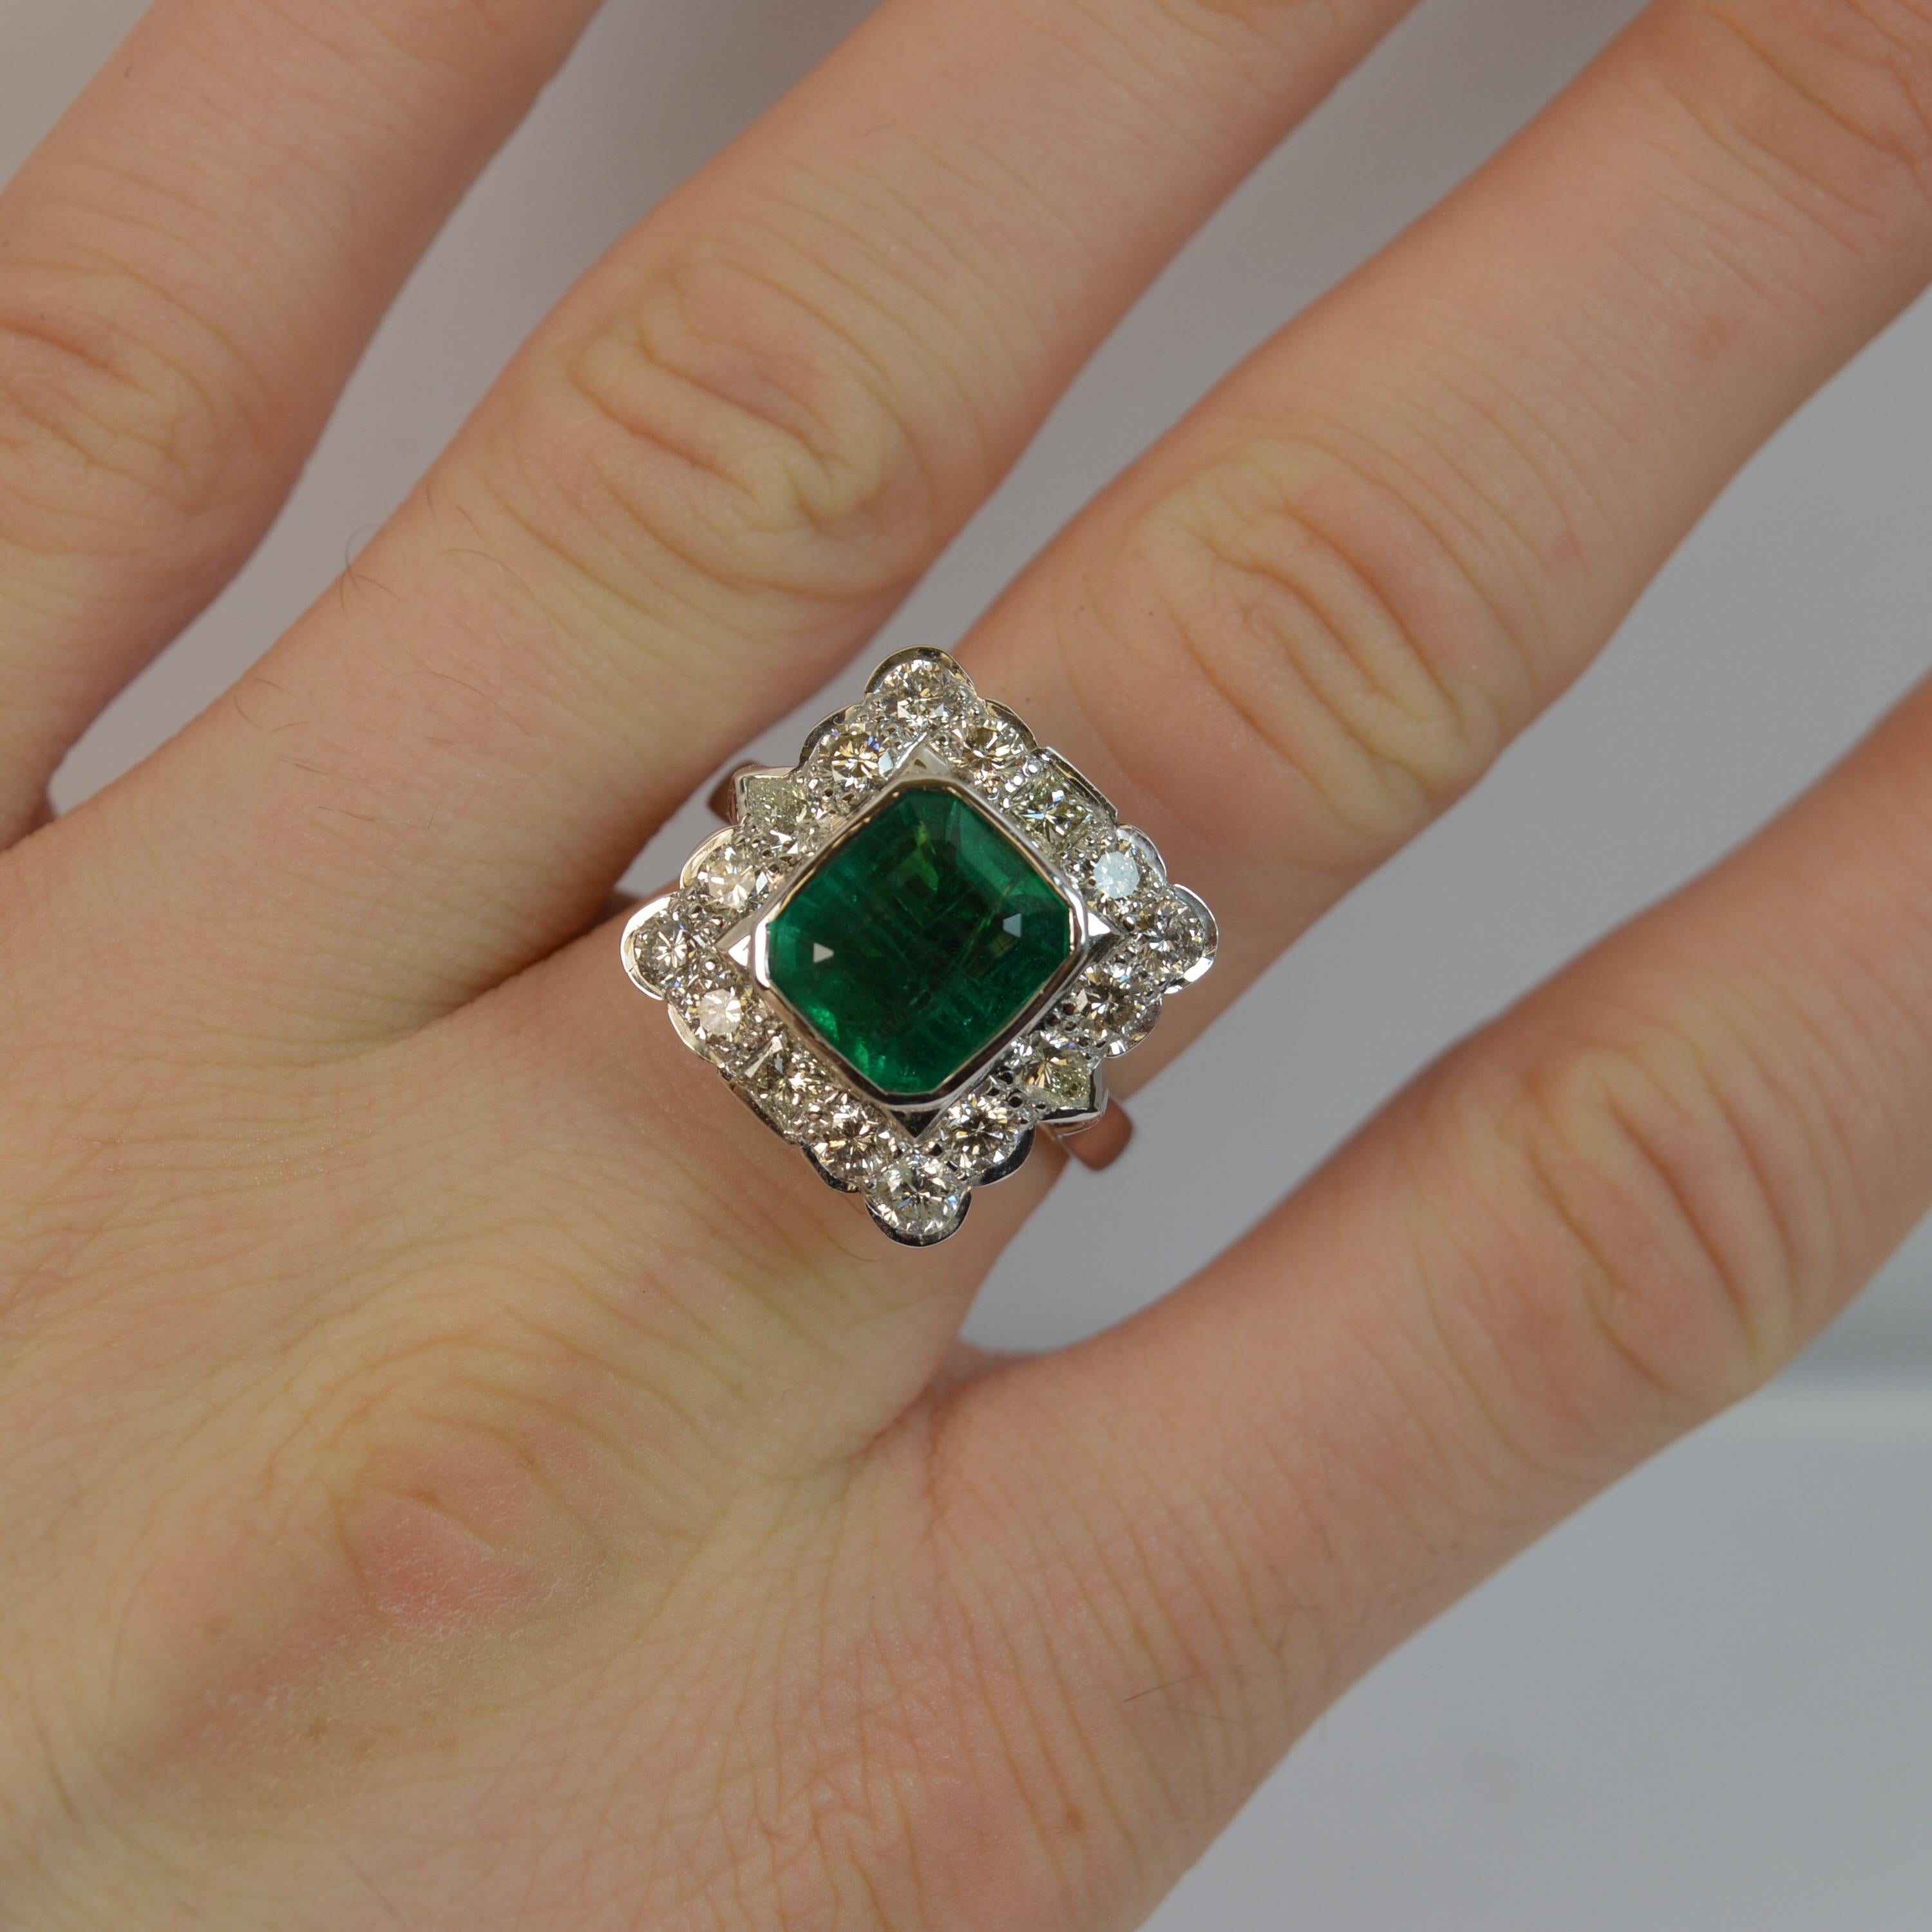 
An absolutely stunning Emerald and Diamond cluster or cocktail ring.

Set with a large cushion emerald cut natural emerald in a collet mount to the centre, 8.7mm x 9.7mm approx. A very vibrant and vivid emerald.

Surrounding the emerald are 12